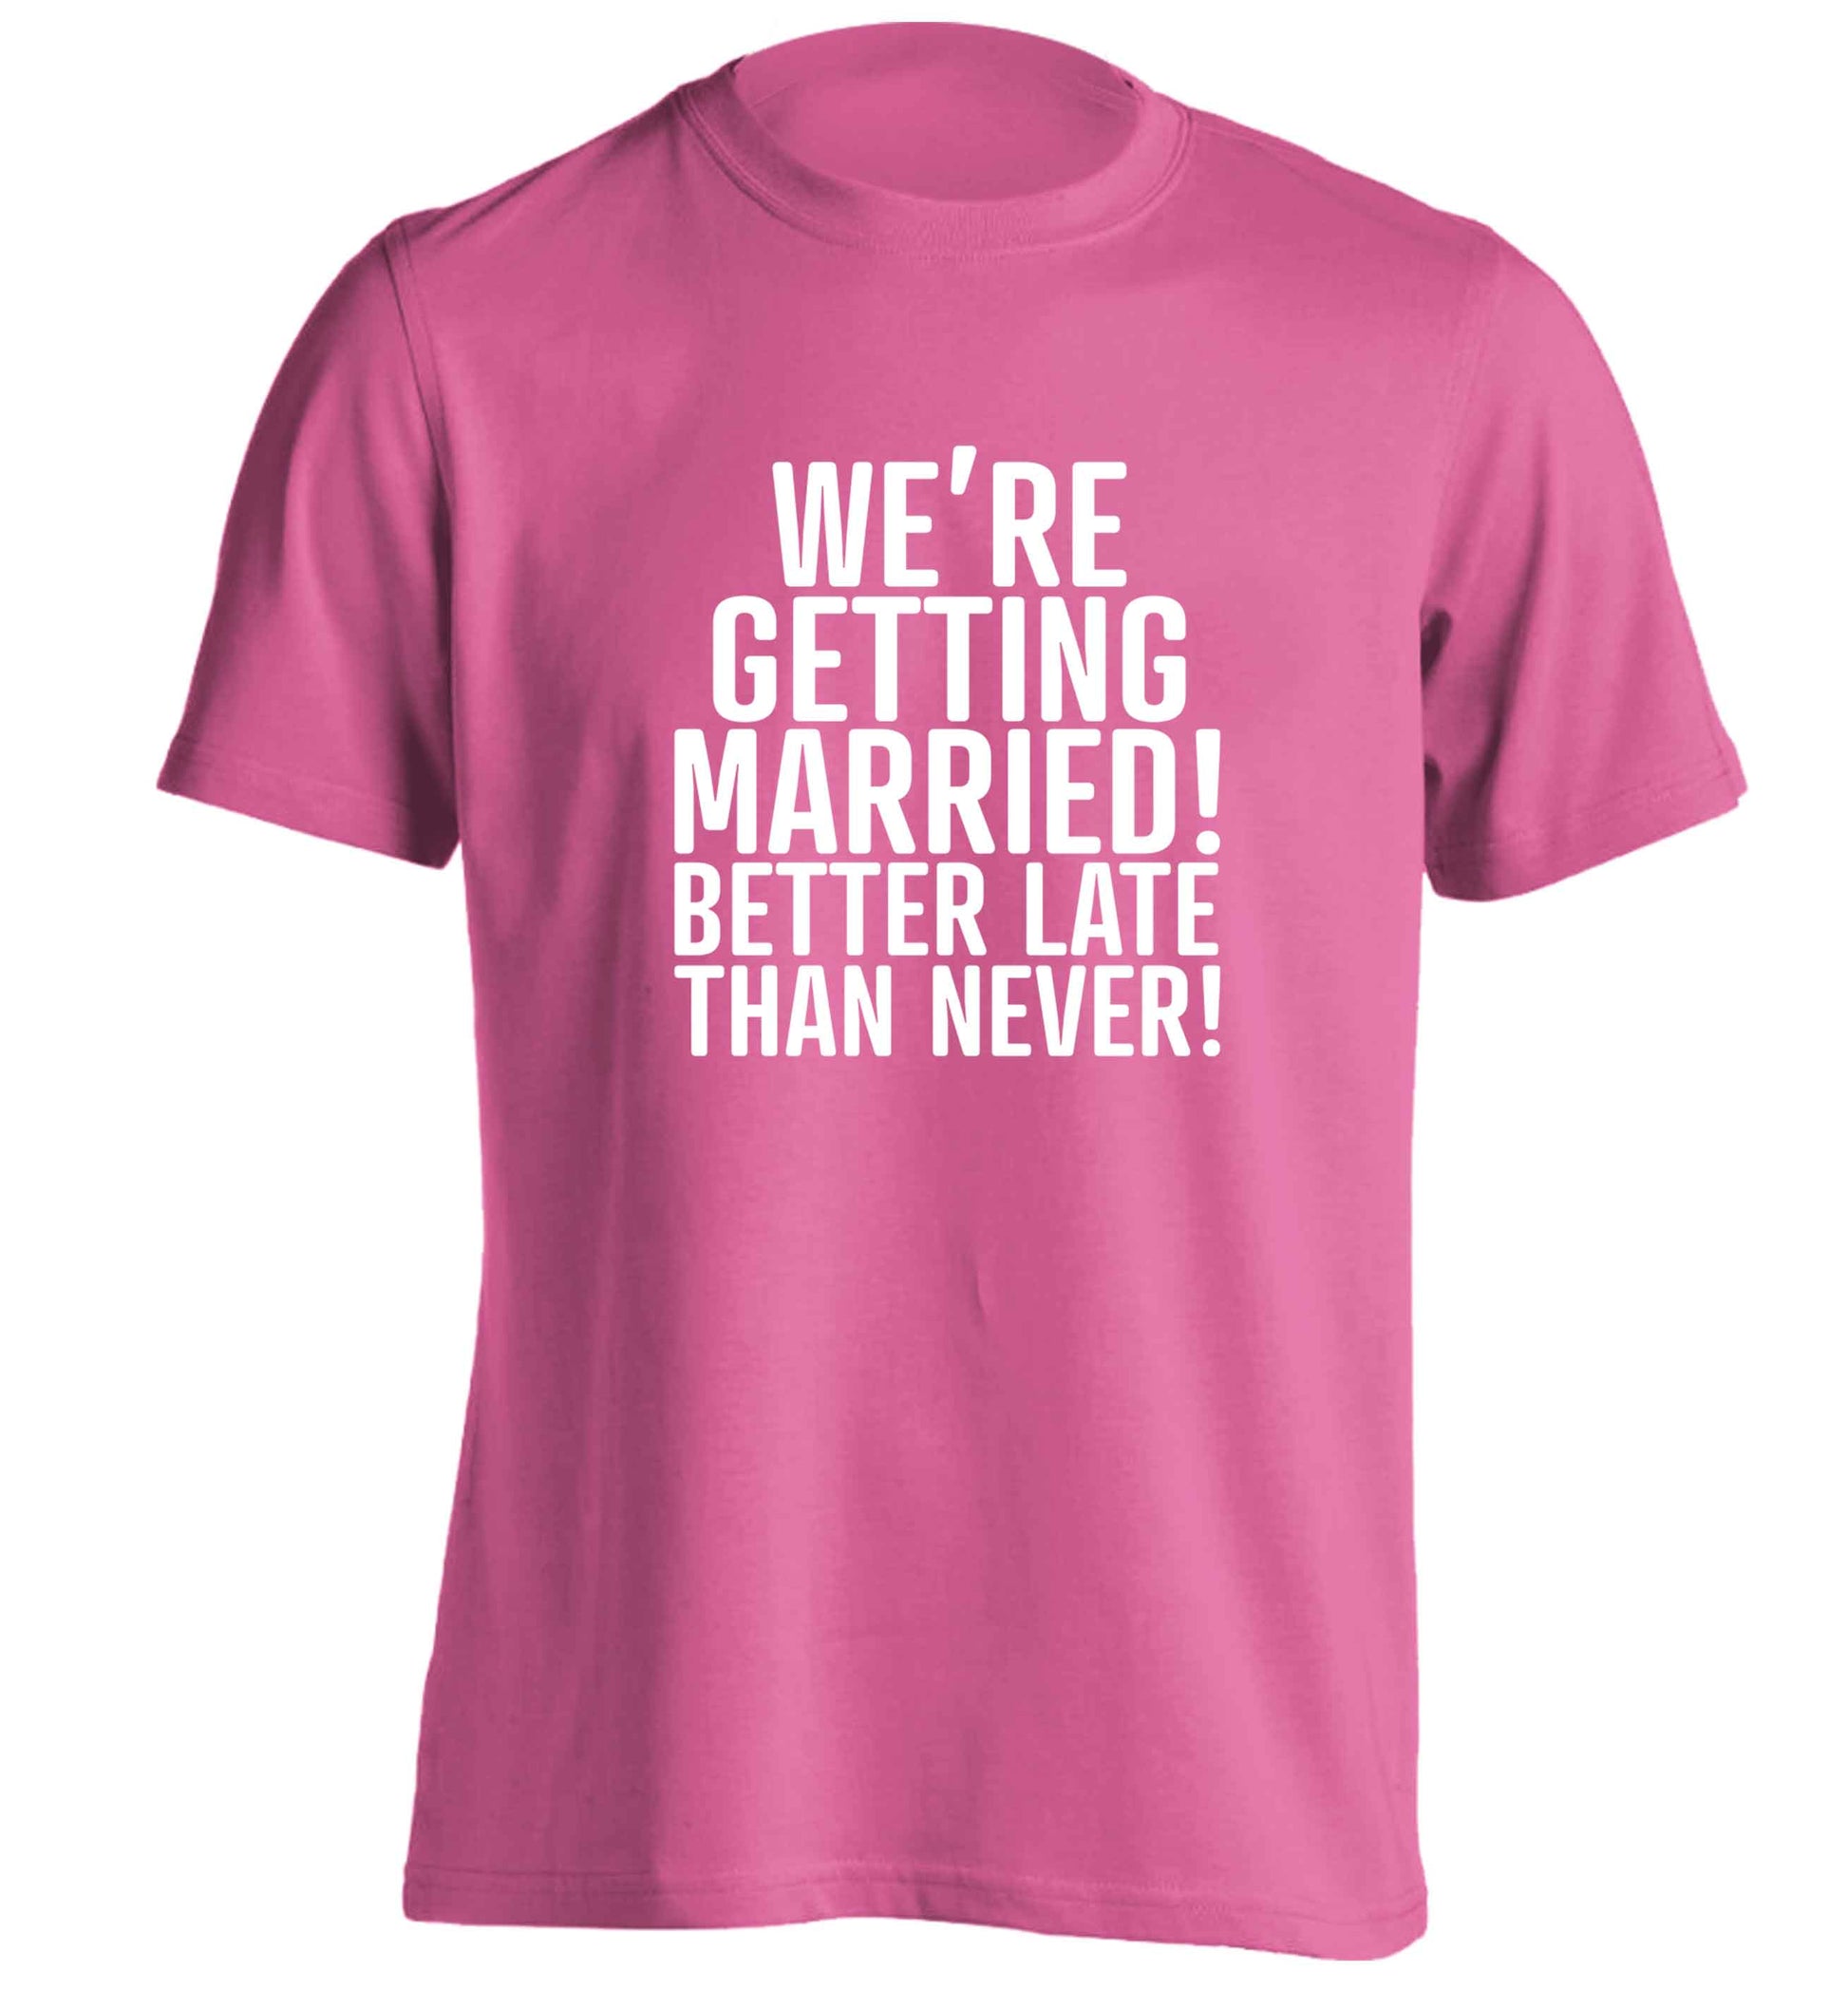 Always the bridesmaid but never the bride? Until now! adults unisex pink Tshirt 2XL